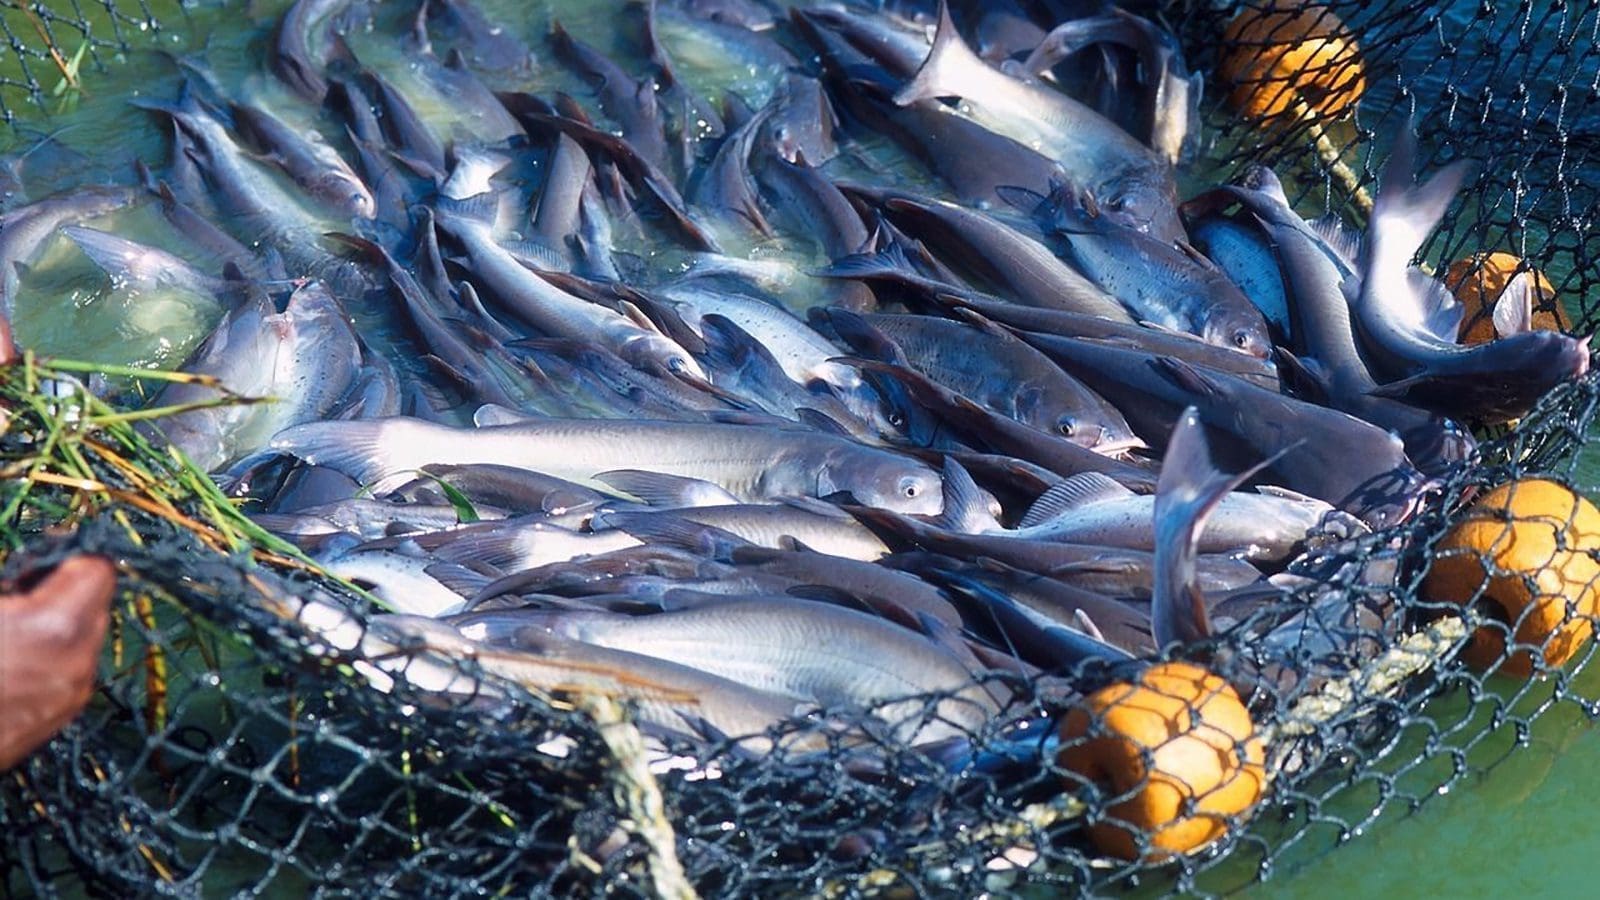 Sustainable fishing efforts suffers setback in Namibia as bycatch caught hits US$3.2M mark